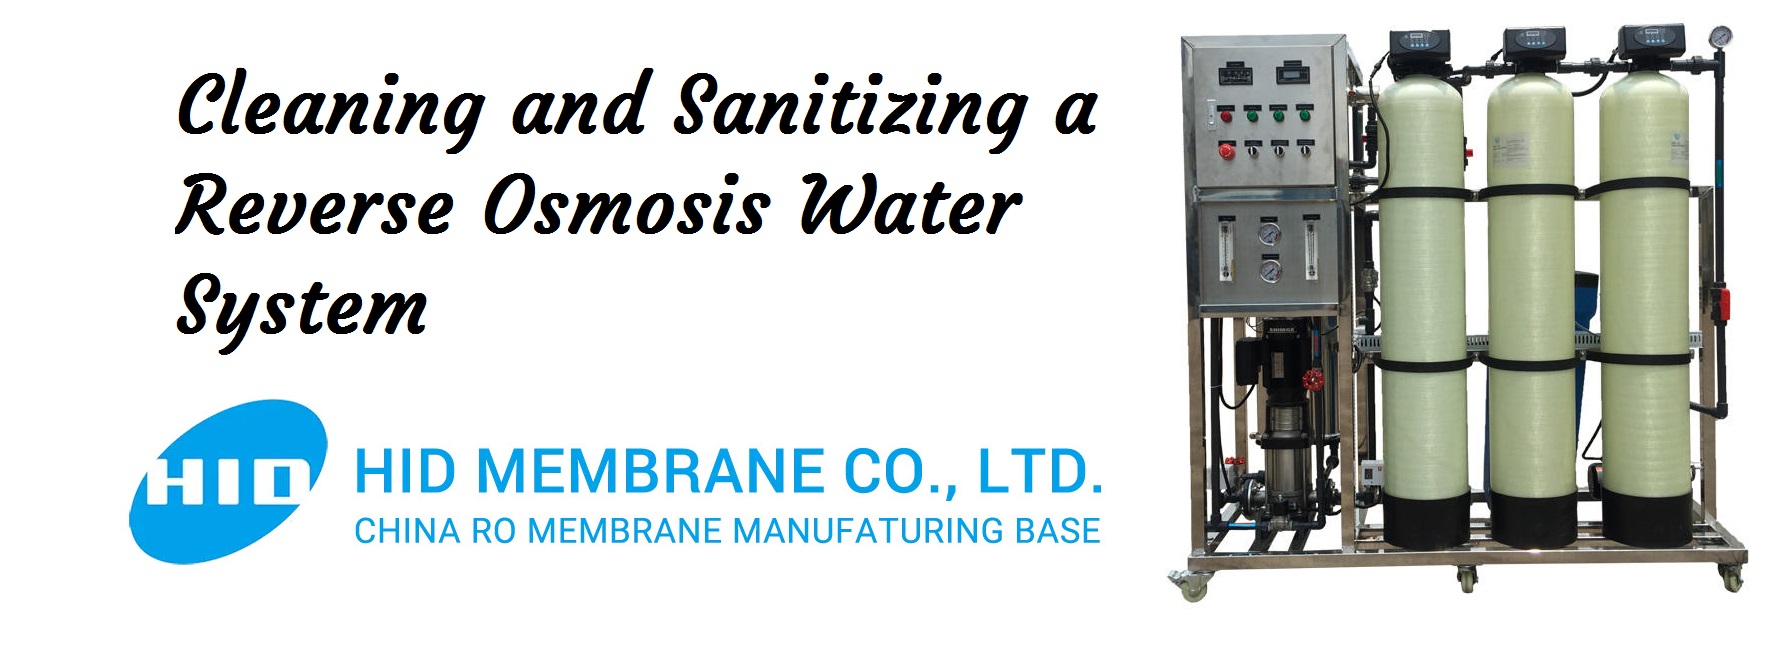 Cleaning and Sanitizing a Reverse Osmosis Water System